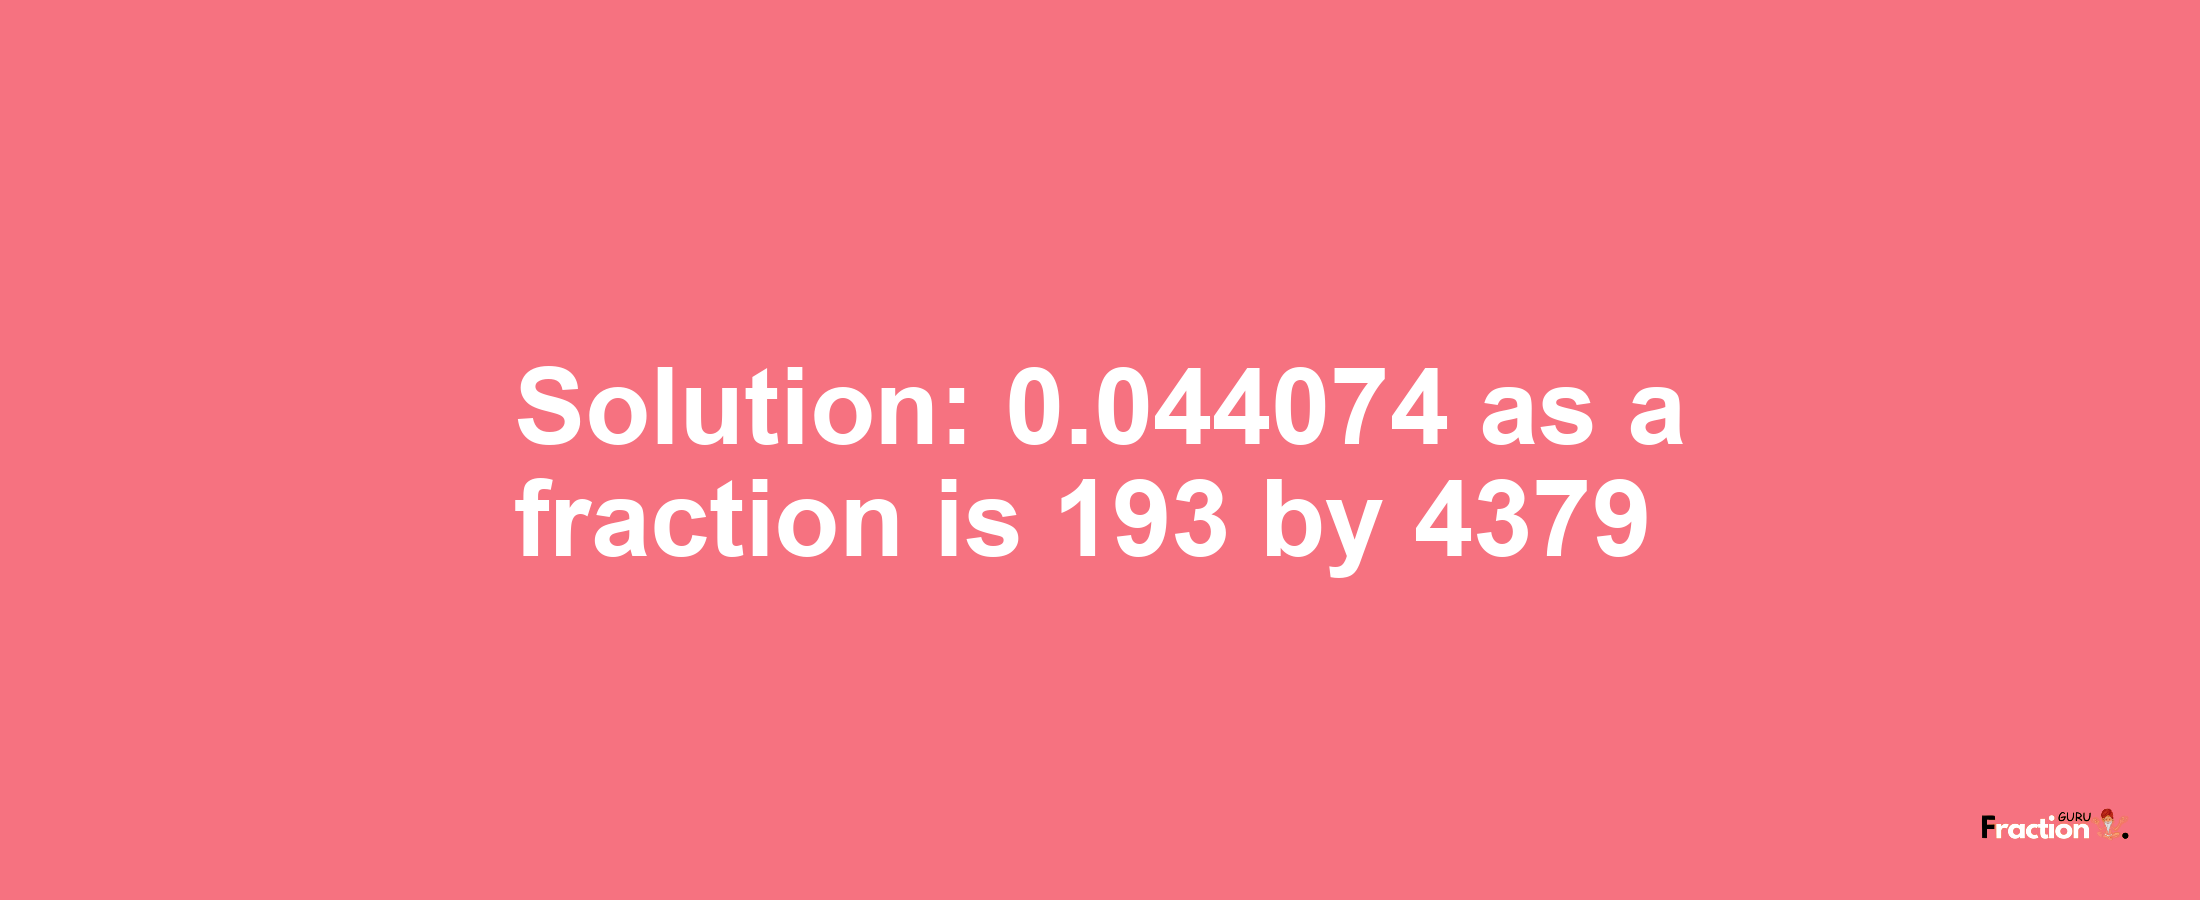 Solution:0.044074 as a fraction is 193/4379